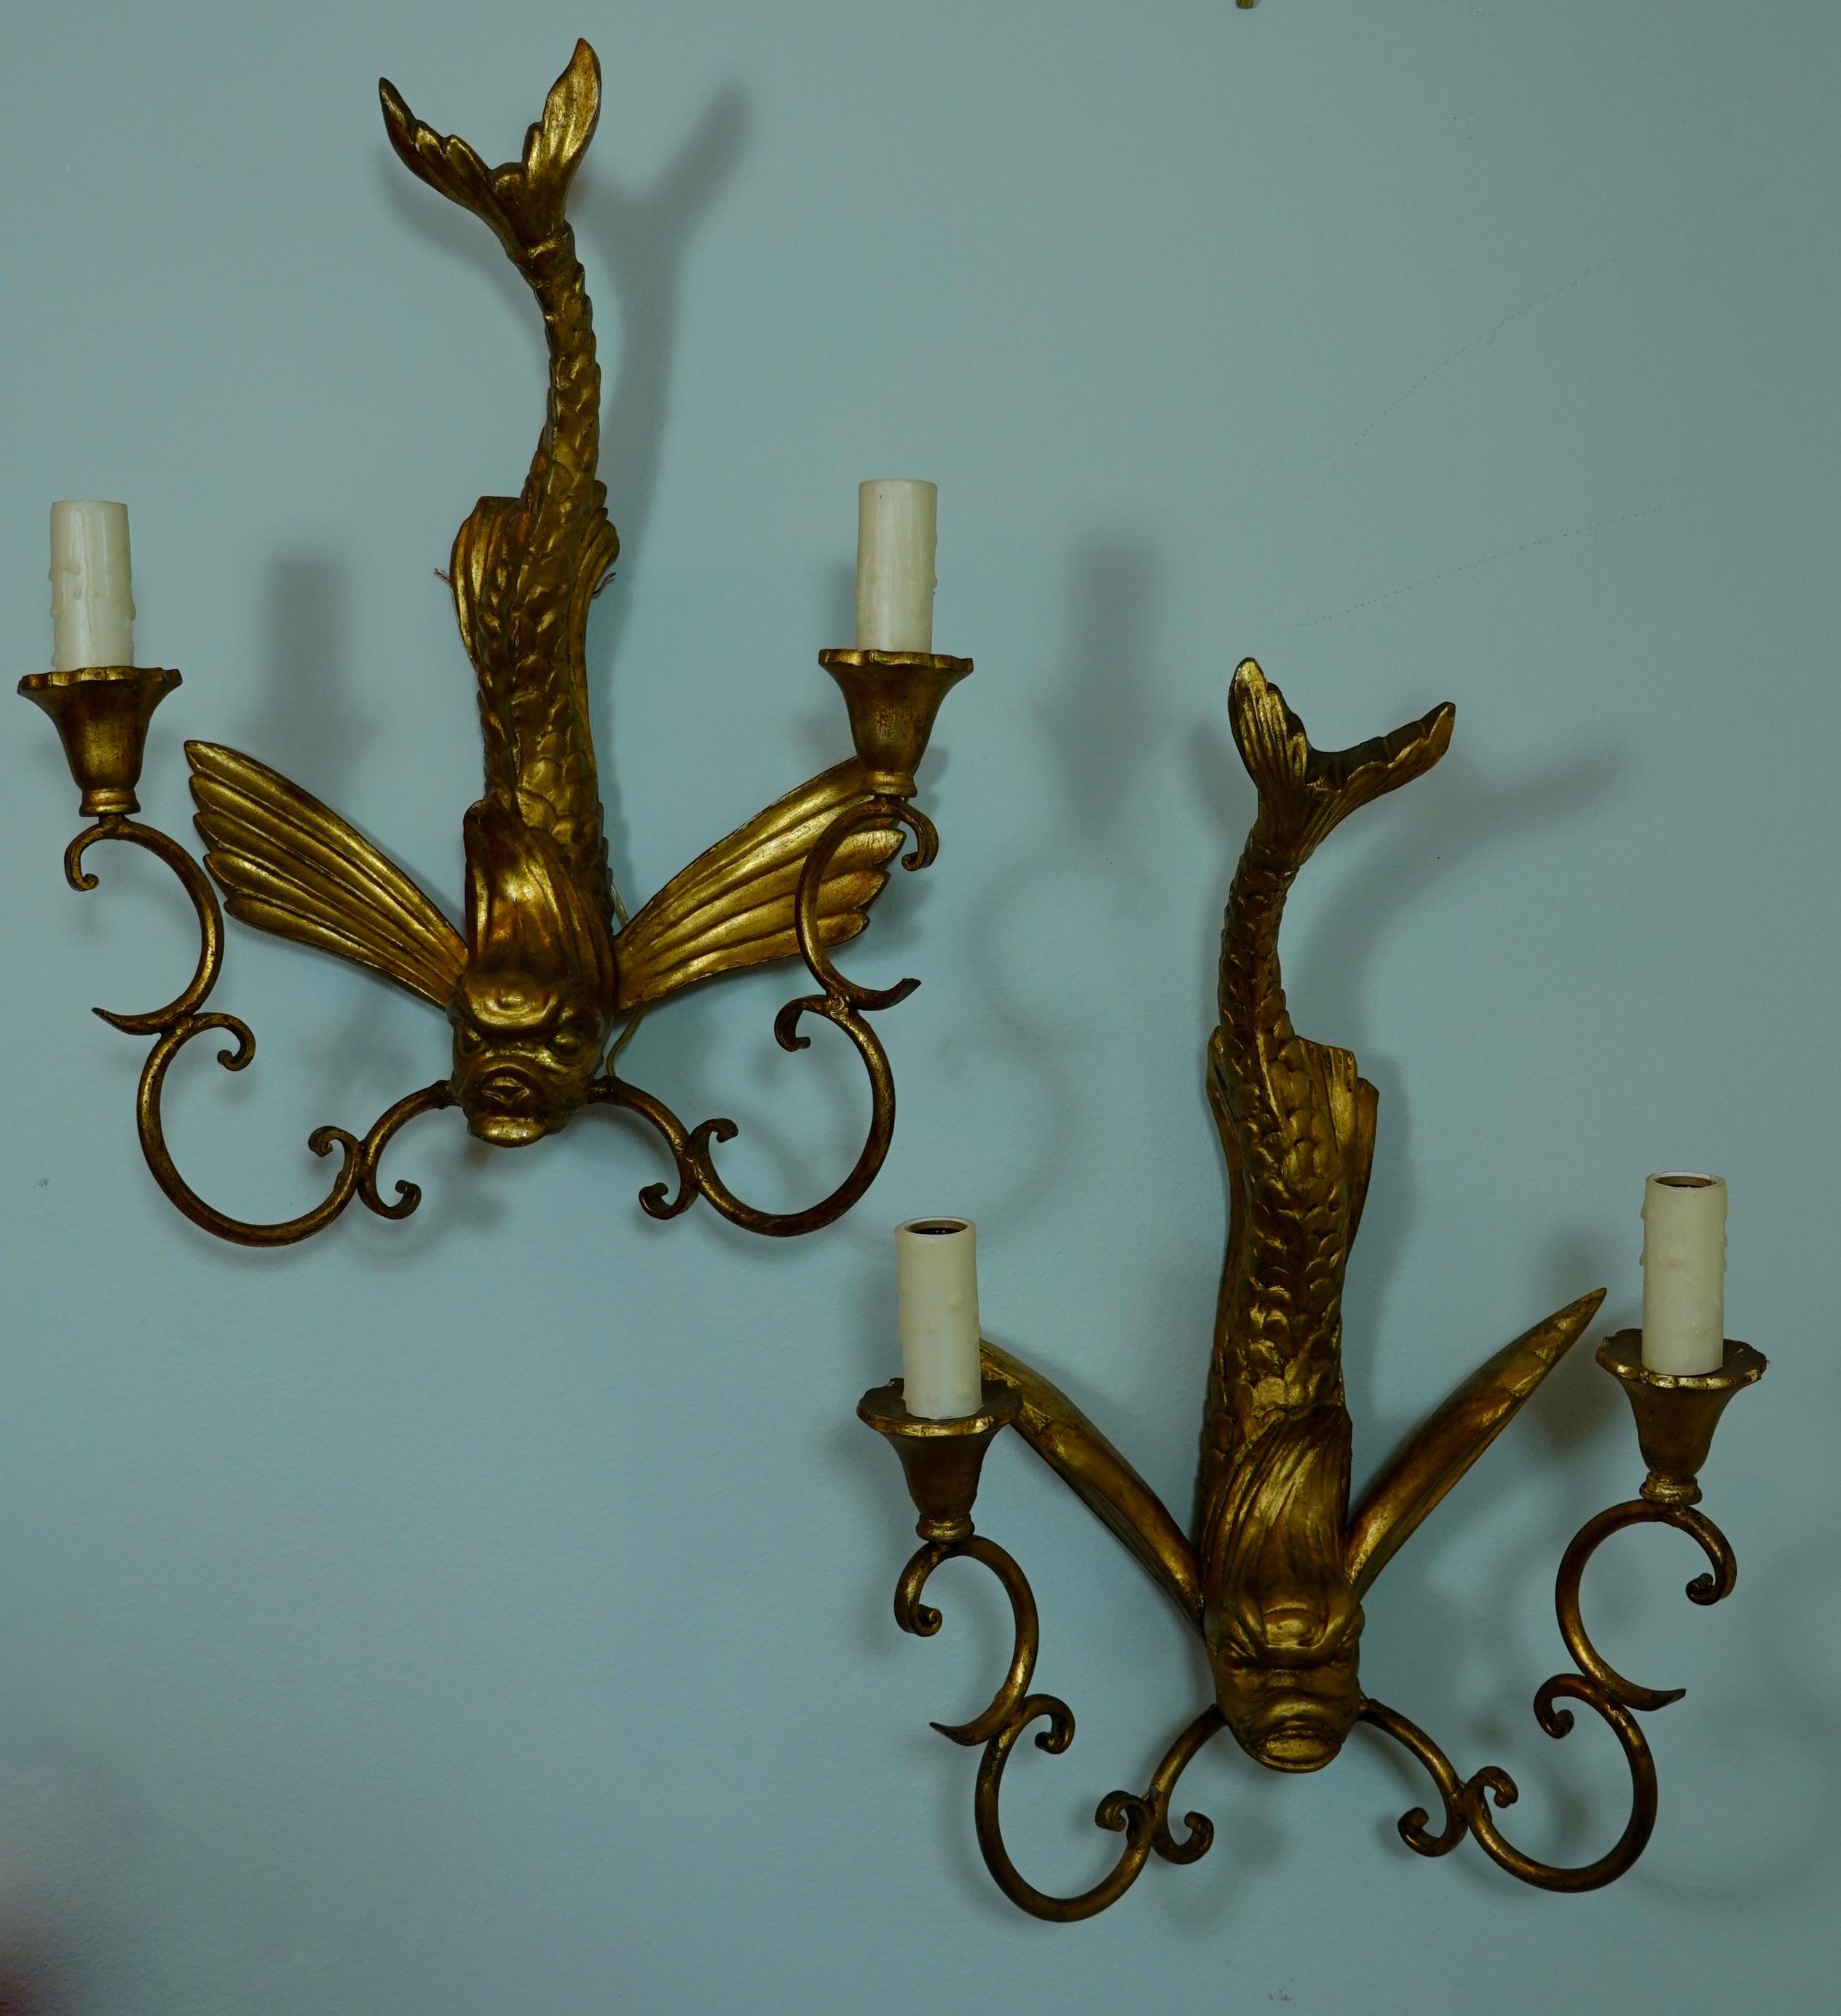 Pair of Italian carved giltwood sconces in the shape of mythical dolphins (midcentury). Each of the dolphins is unique, hand carved and slightly different (note the fins, forward and back). The sconces have two gilt metal arms comprising 